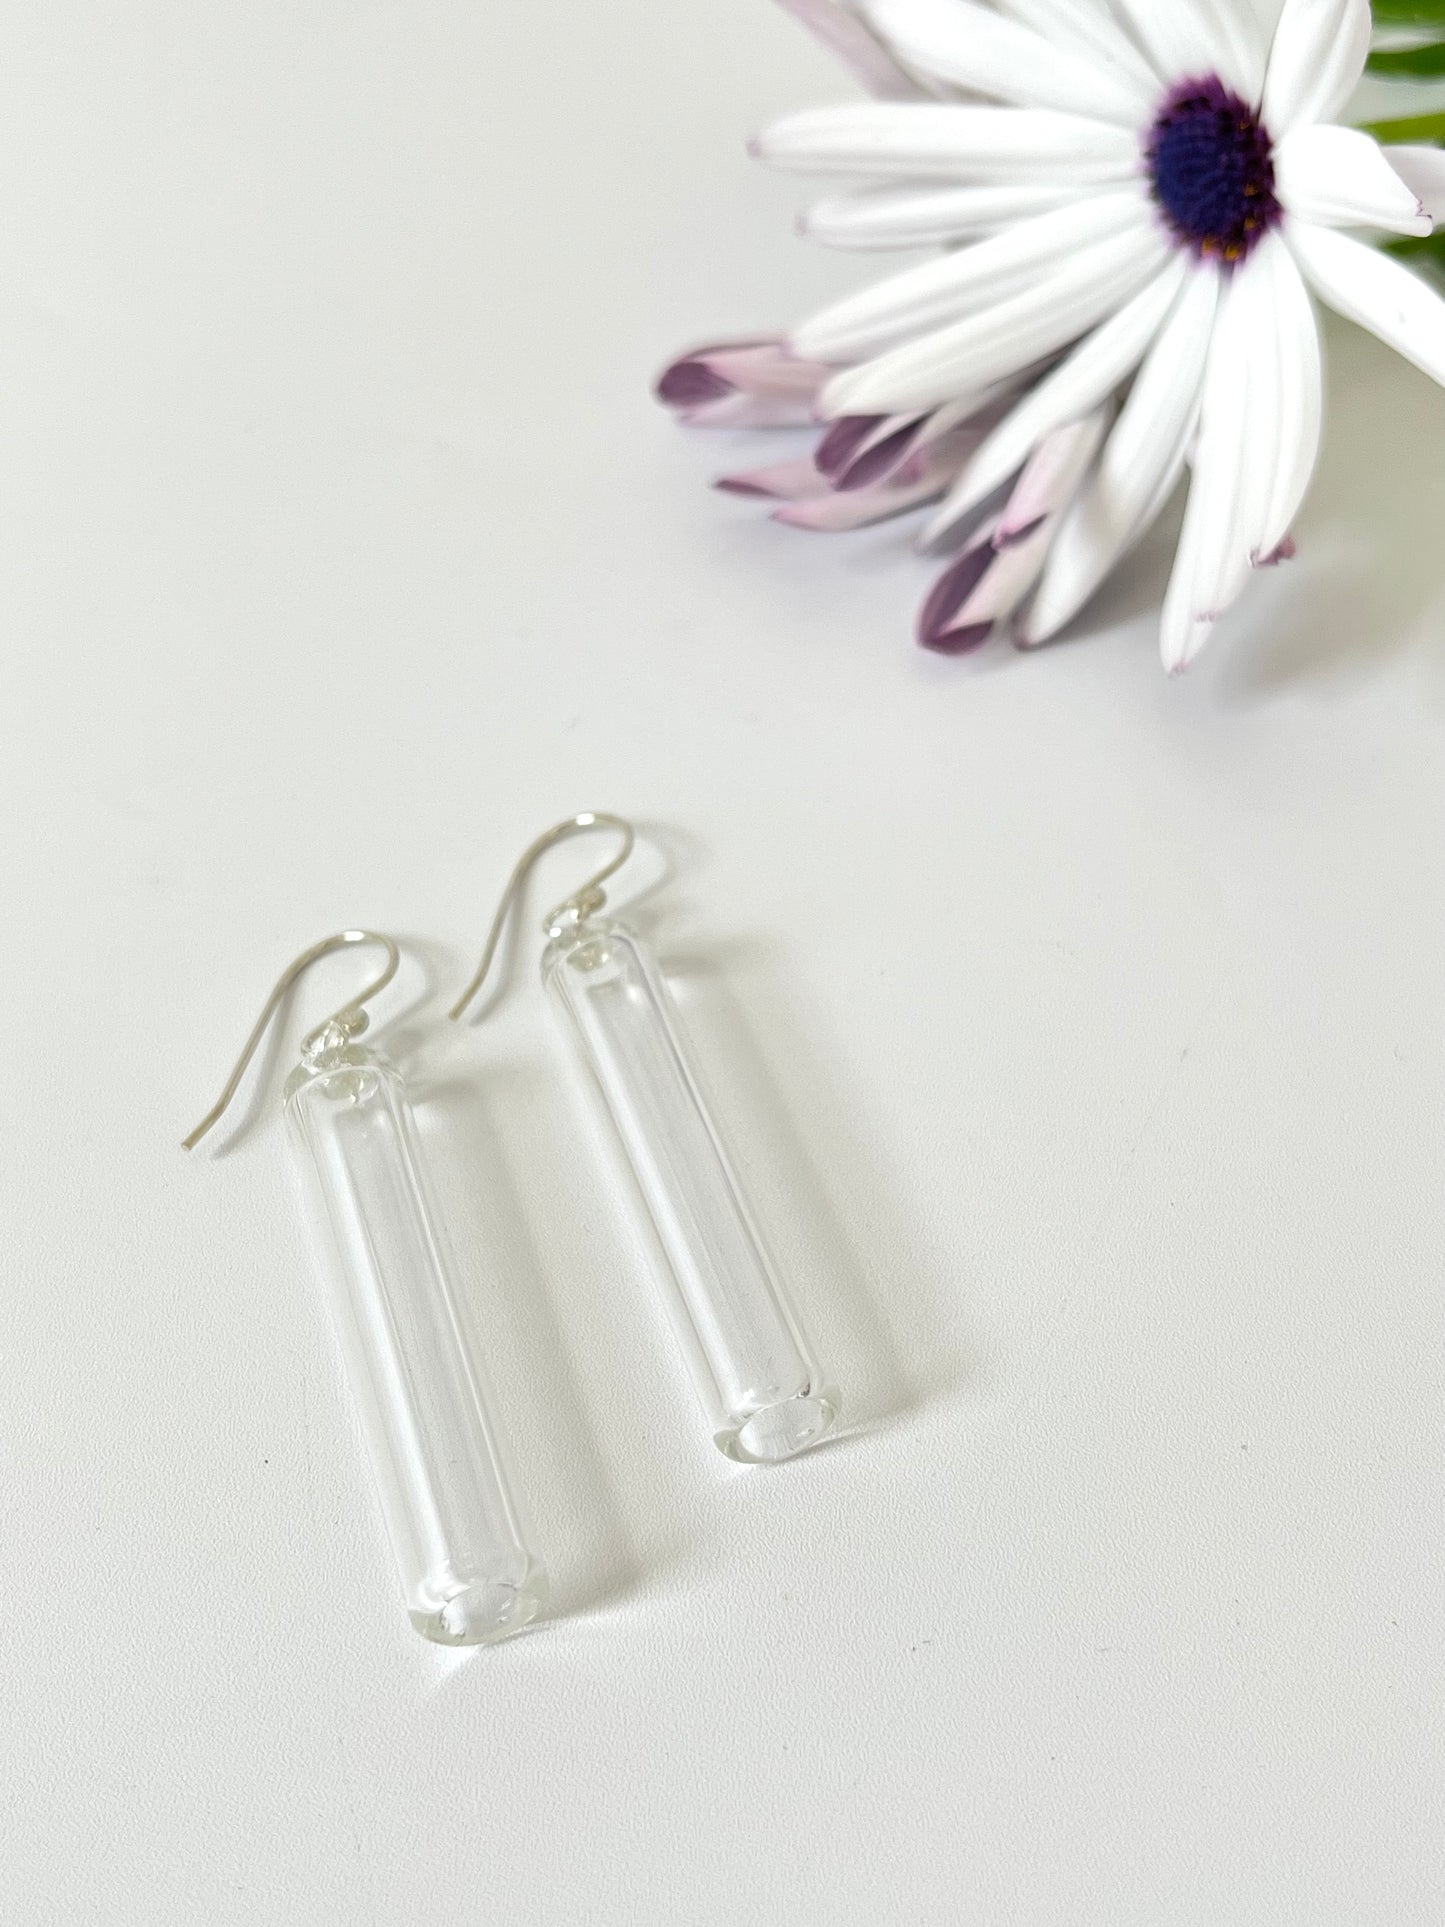 Glass Cylinder & Sterling Silver Earrings - Clear